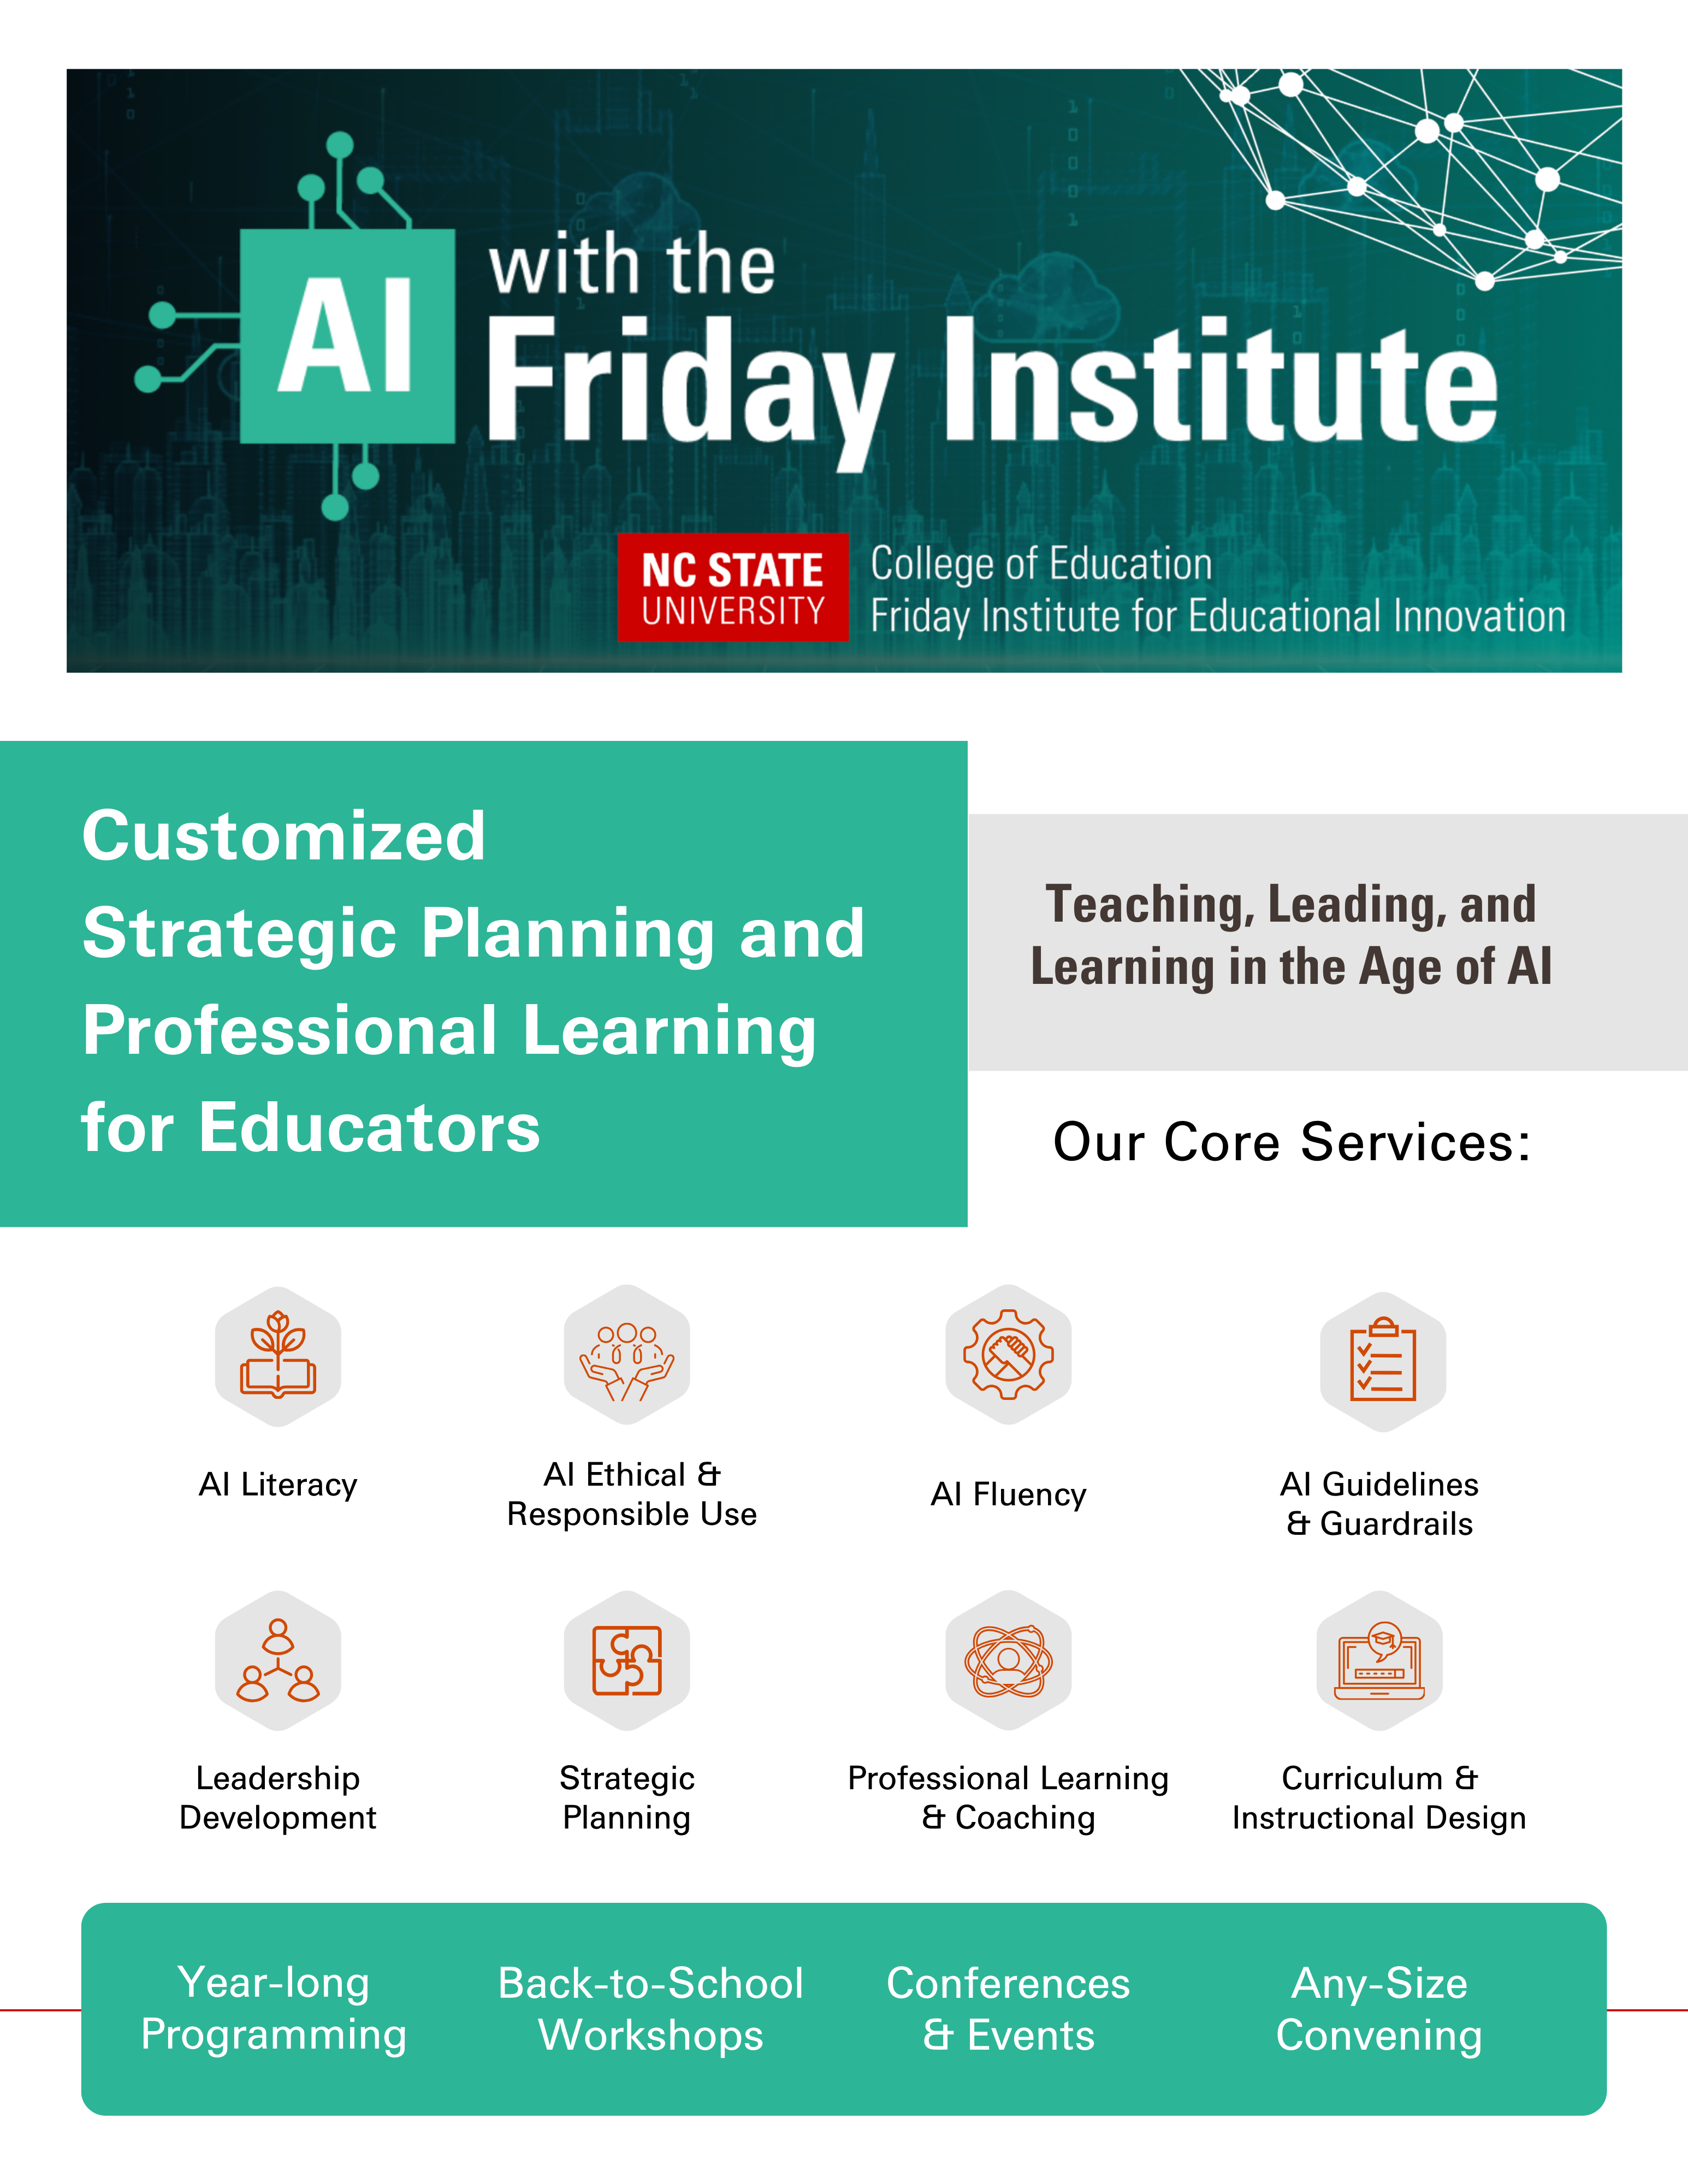 AI with the Friday Institute handout featuring key services: AI literacy, AI ethical and responsible use, AI fluency, AI guidelines and guardrails, leadership development, strategic planning, professional learning and coaching, curriculum and instructional design